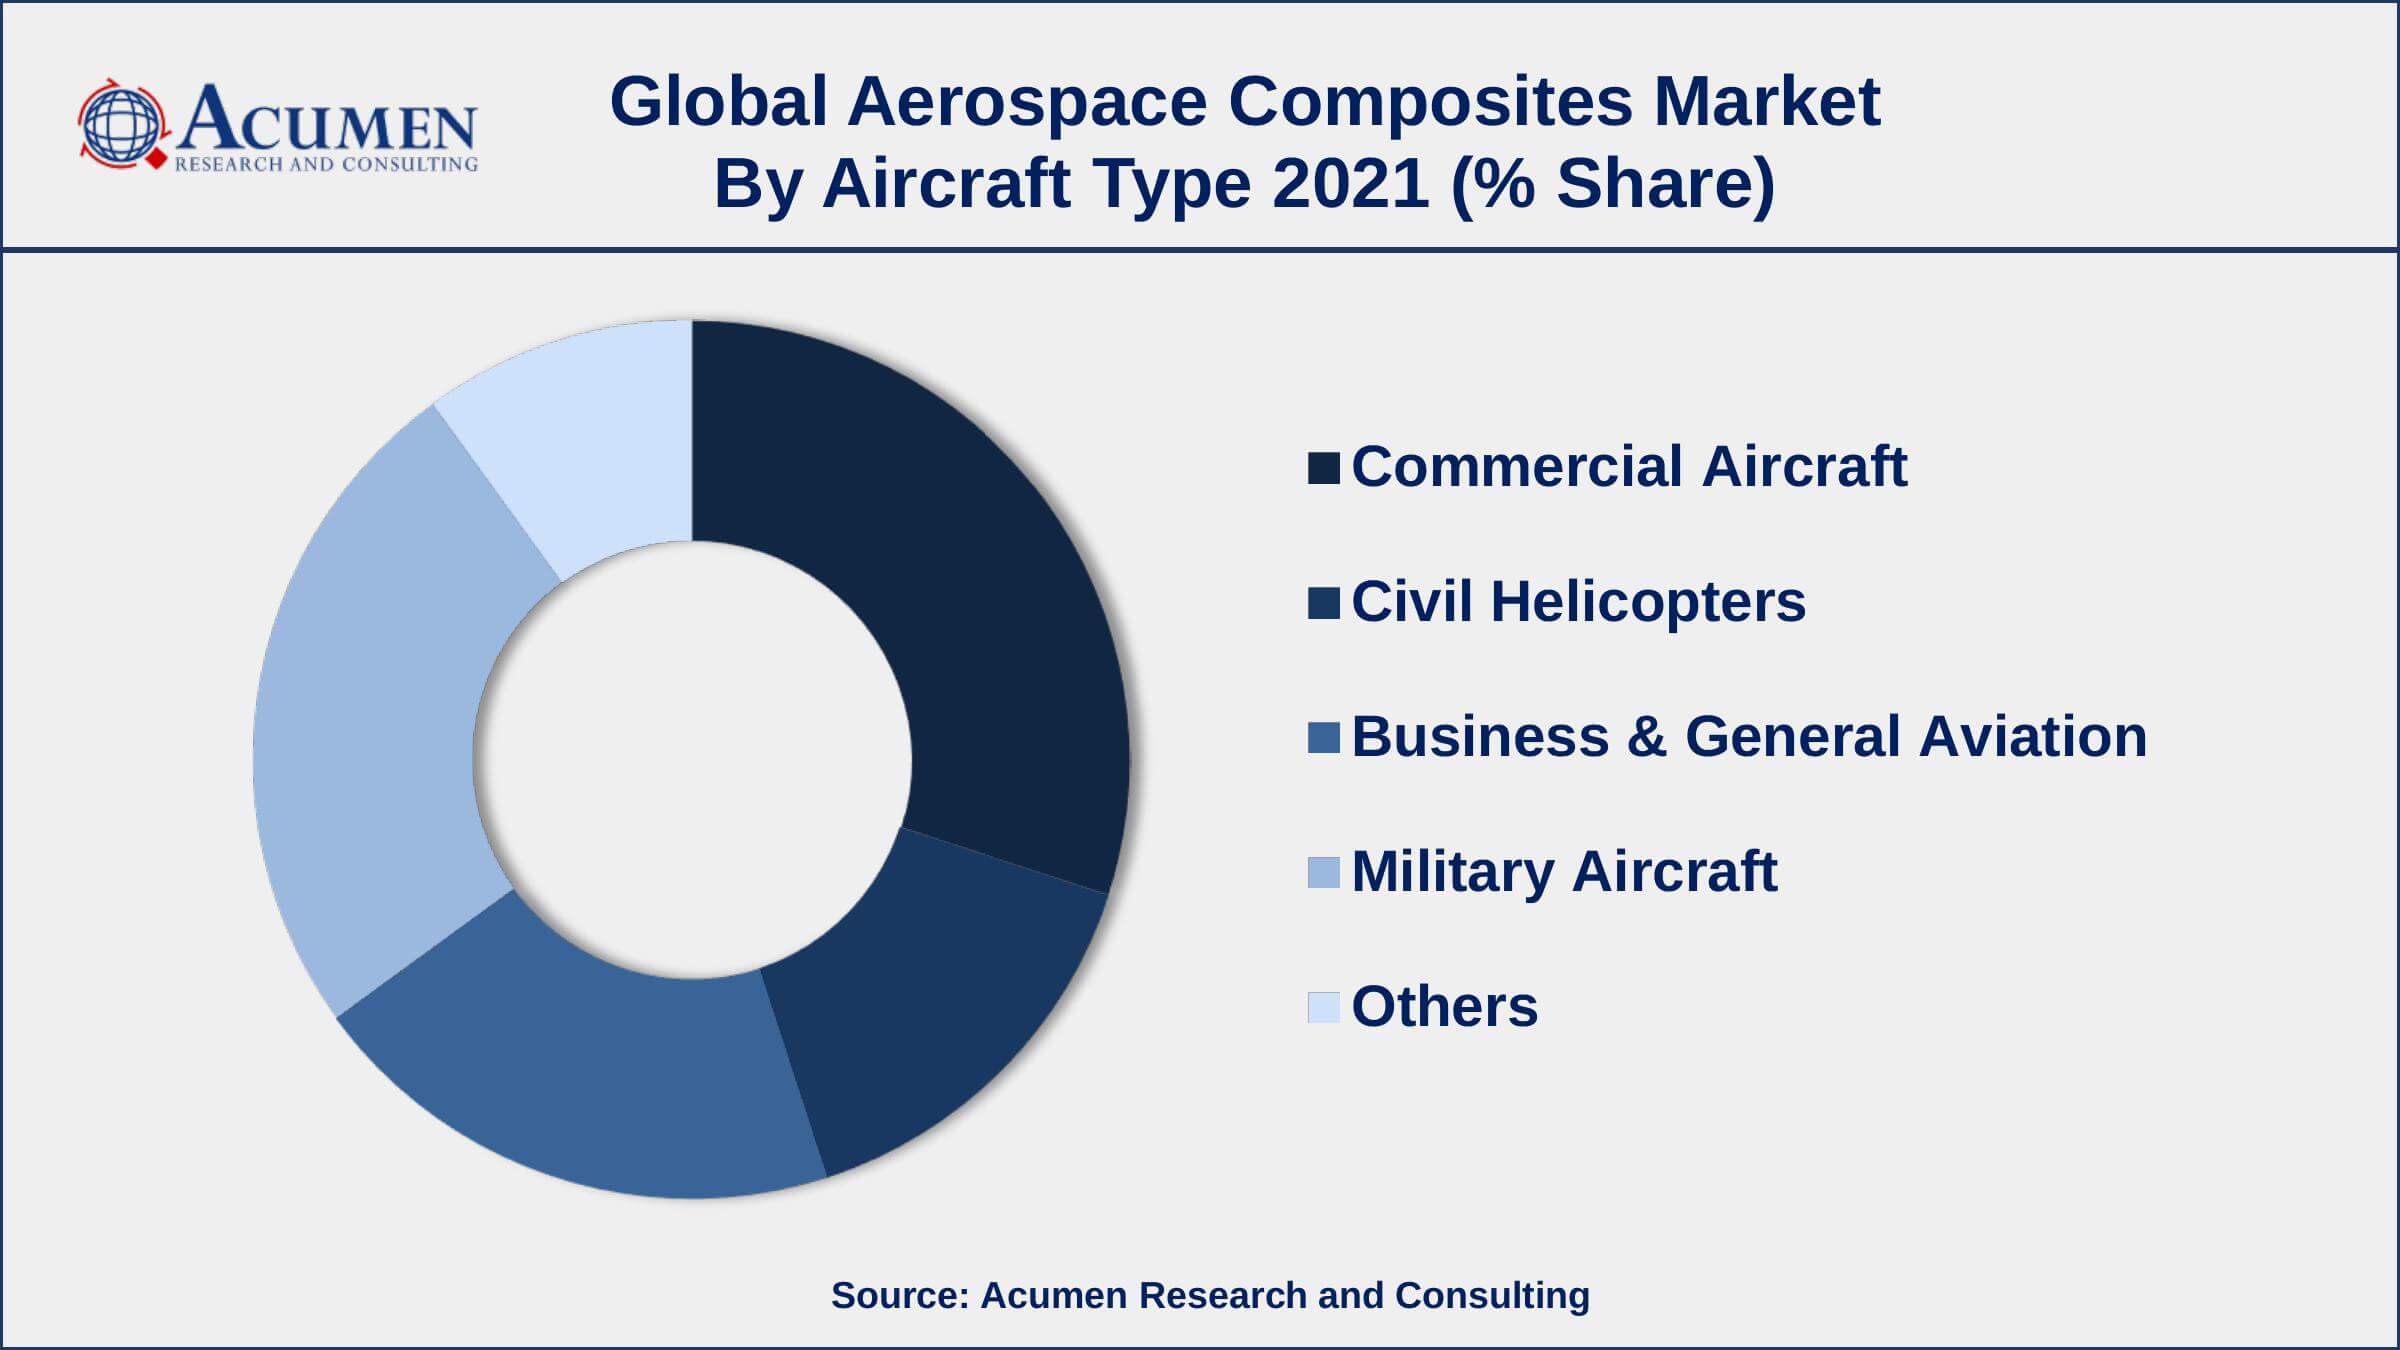 By aircraft type, the commercial aircraft engaged more than 38% of the total market share in 2021